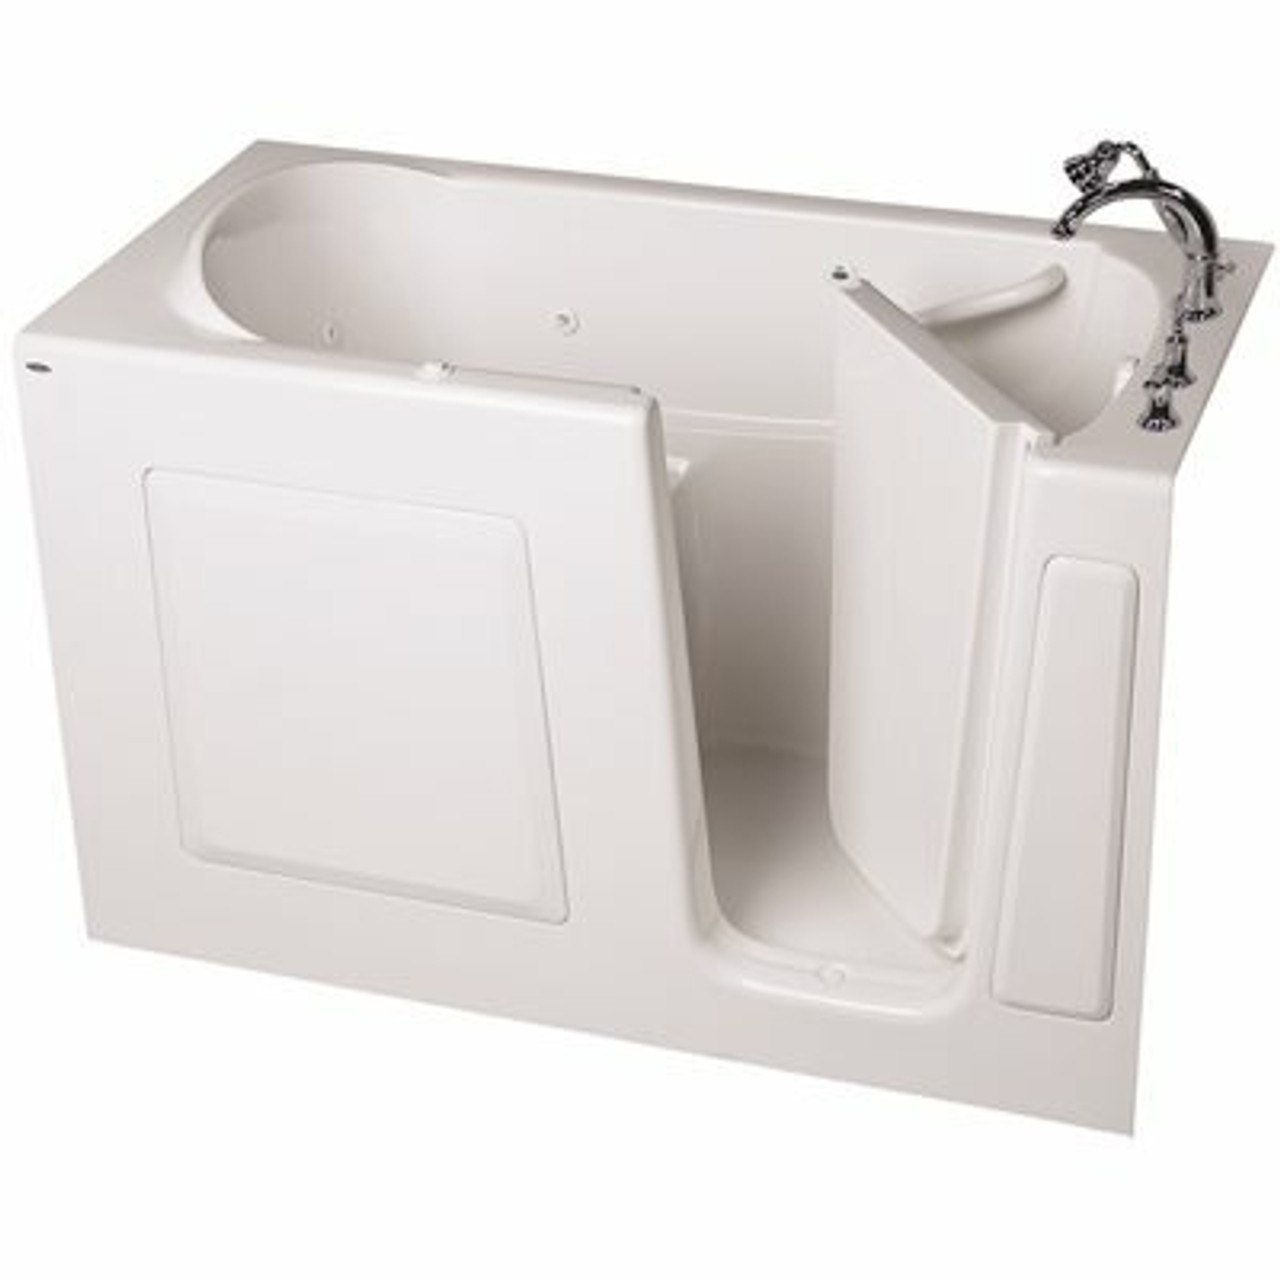 American Standard Gelcoat Walk-In Bath, Whirlpool, Right-Hand With Quick Drain And Faucet, White, 30 In. X 60 In.